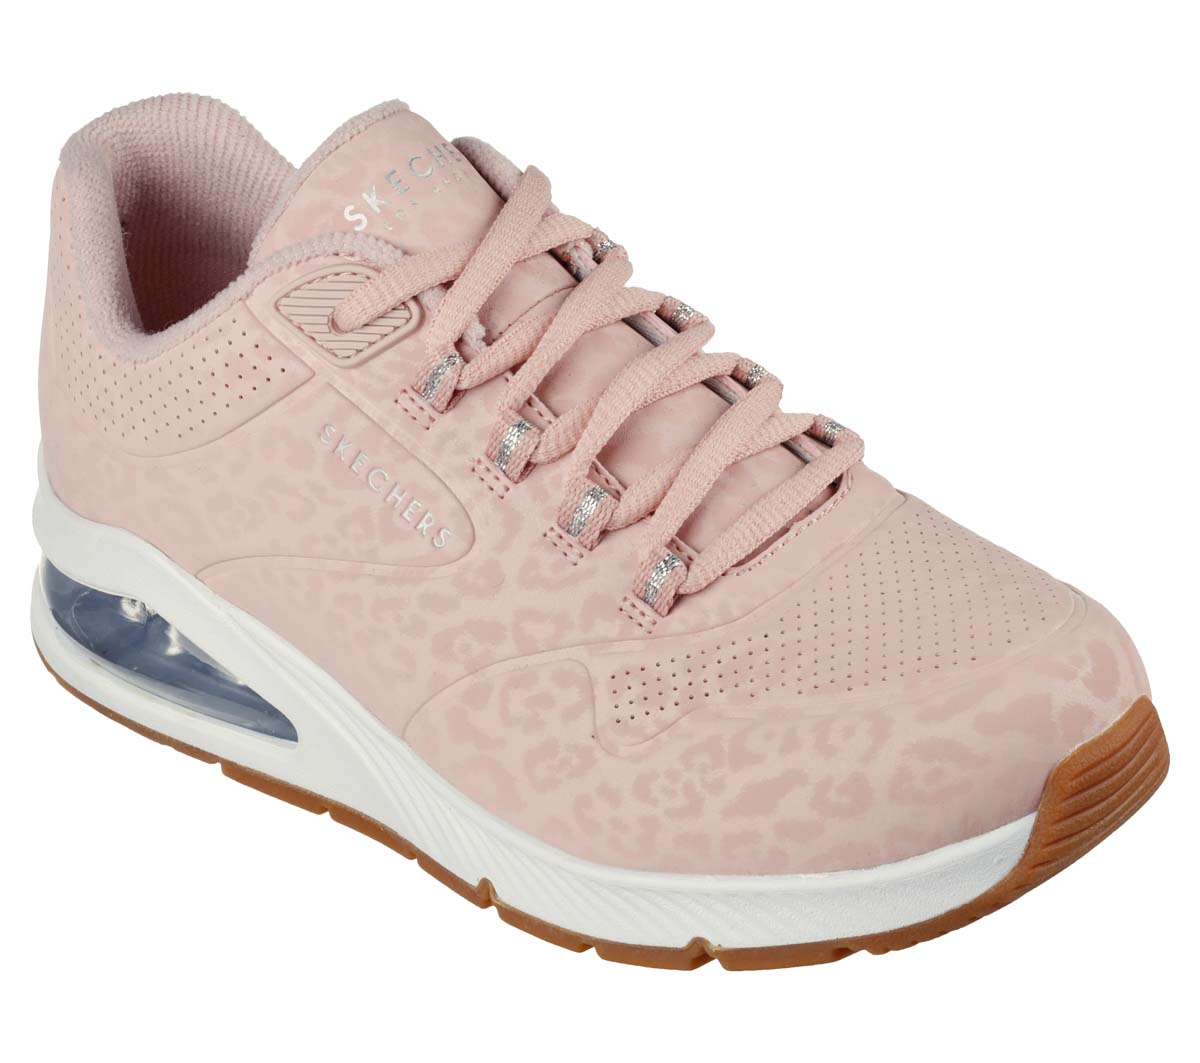 Skechers Uno 2 Leopard Blush Pink Womens Trainers 155642 In Size 6 In Plain Blush Pink